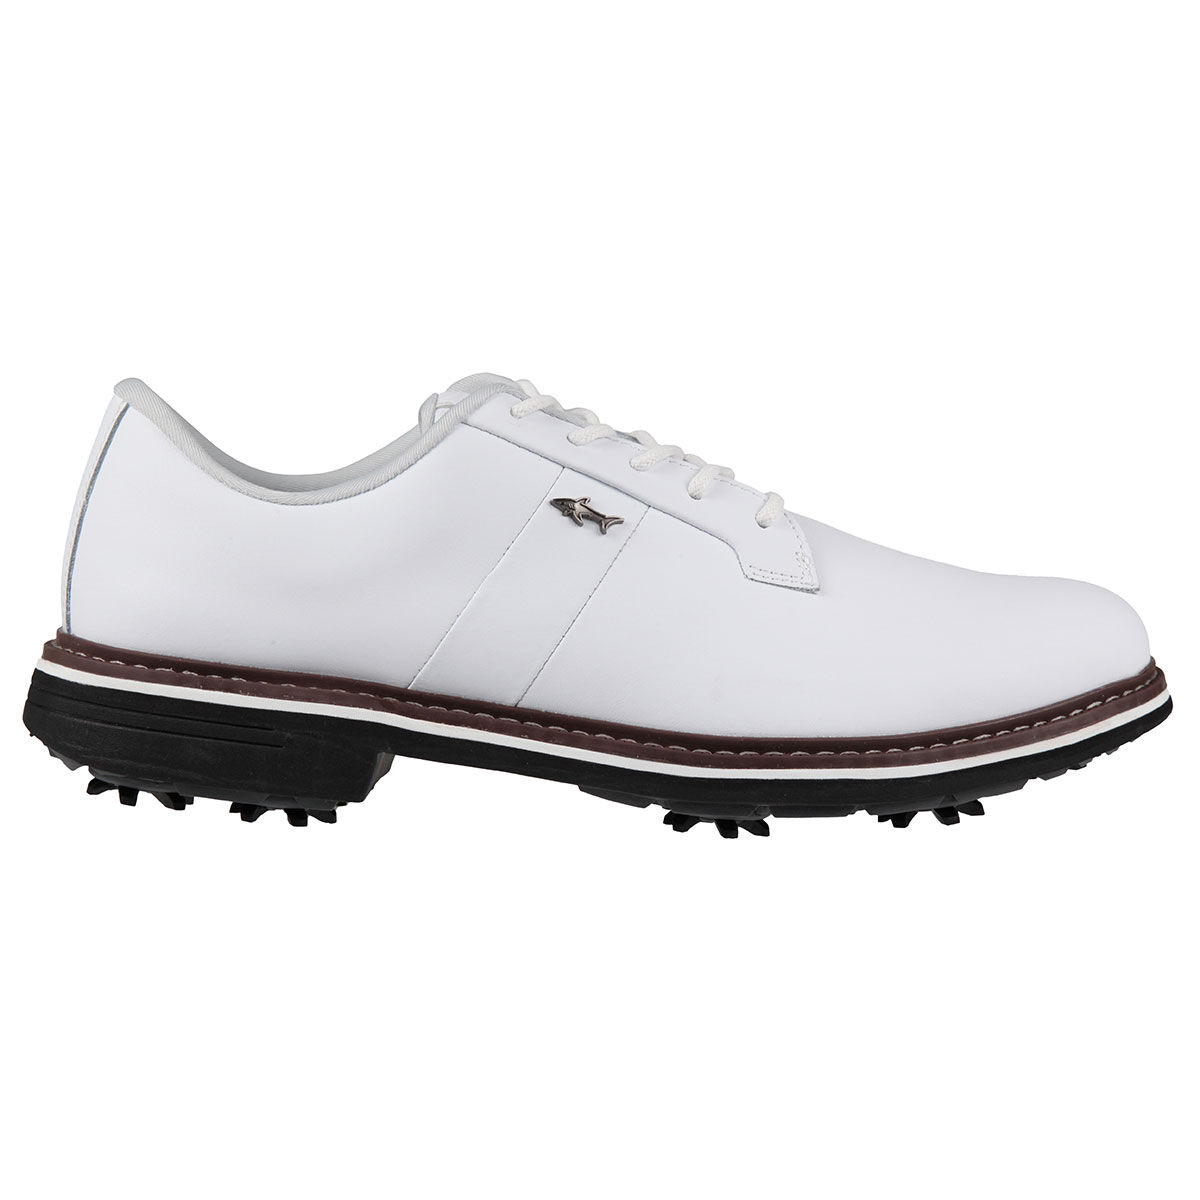 Greg Norman Men’s Isa Tour 2 Waterproof Spiked Golf Shoes, Mens, White, 8 | American Golf